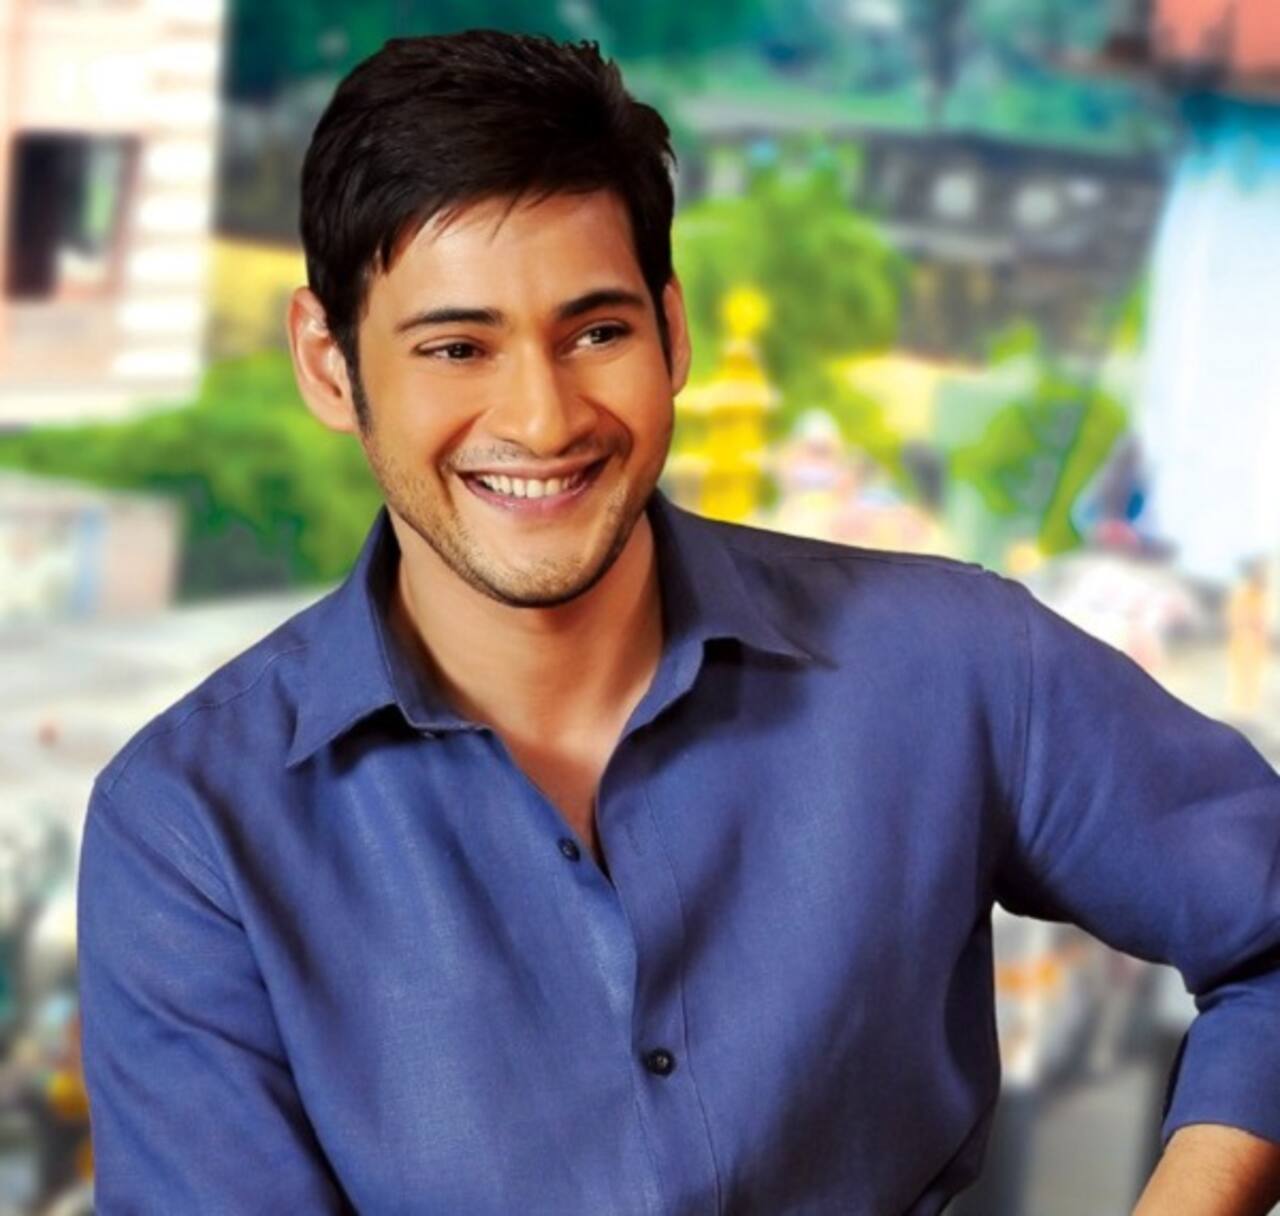 Mahesh Babu proves that he is the king of Tollywood as he bags his third SIIMA award!